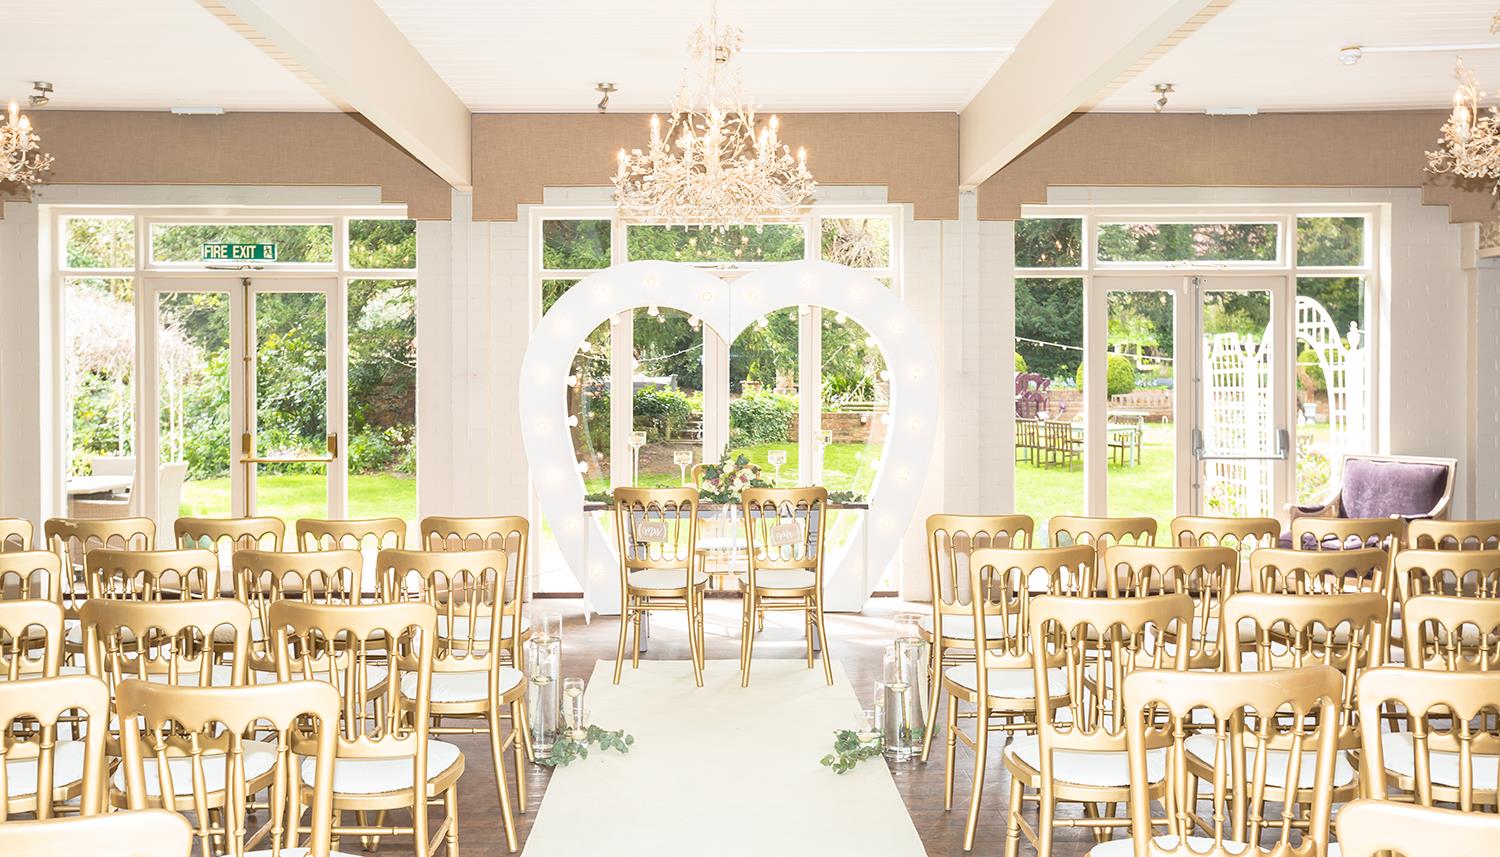 Room ready for ceremony with large windows. Photo Credit: Vevi-photography